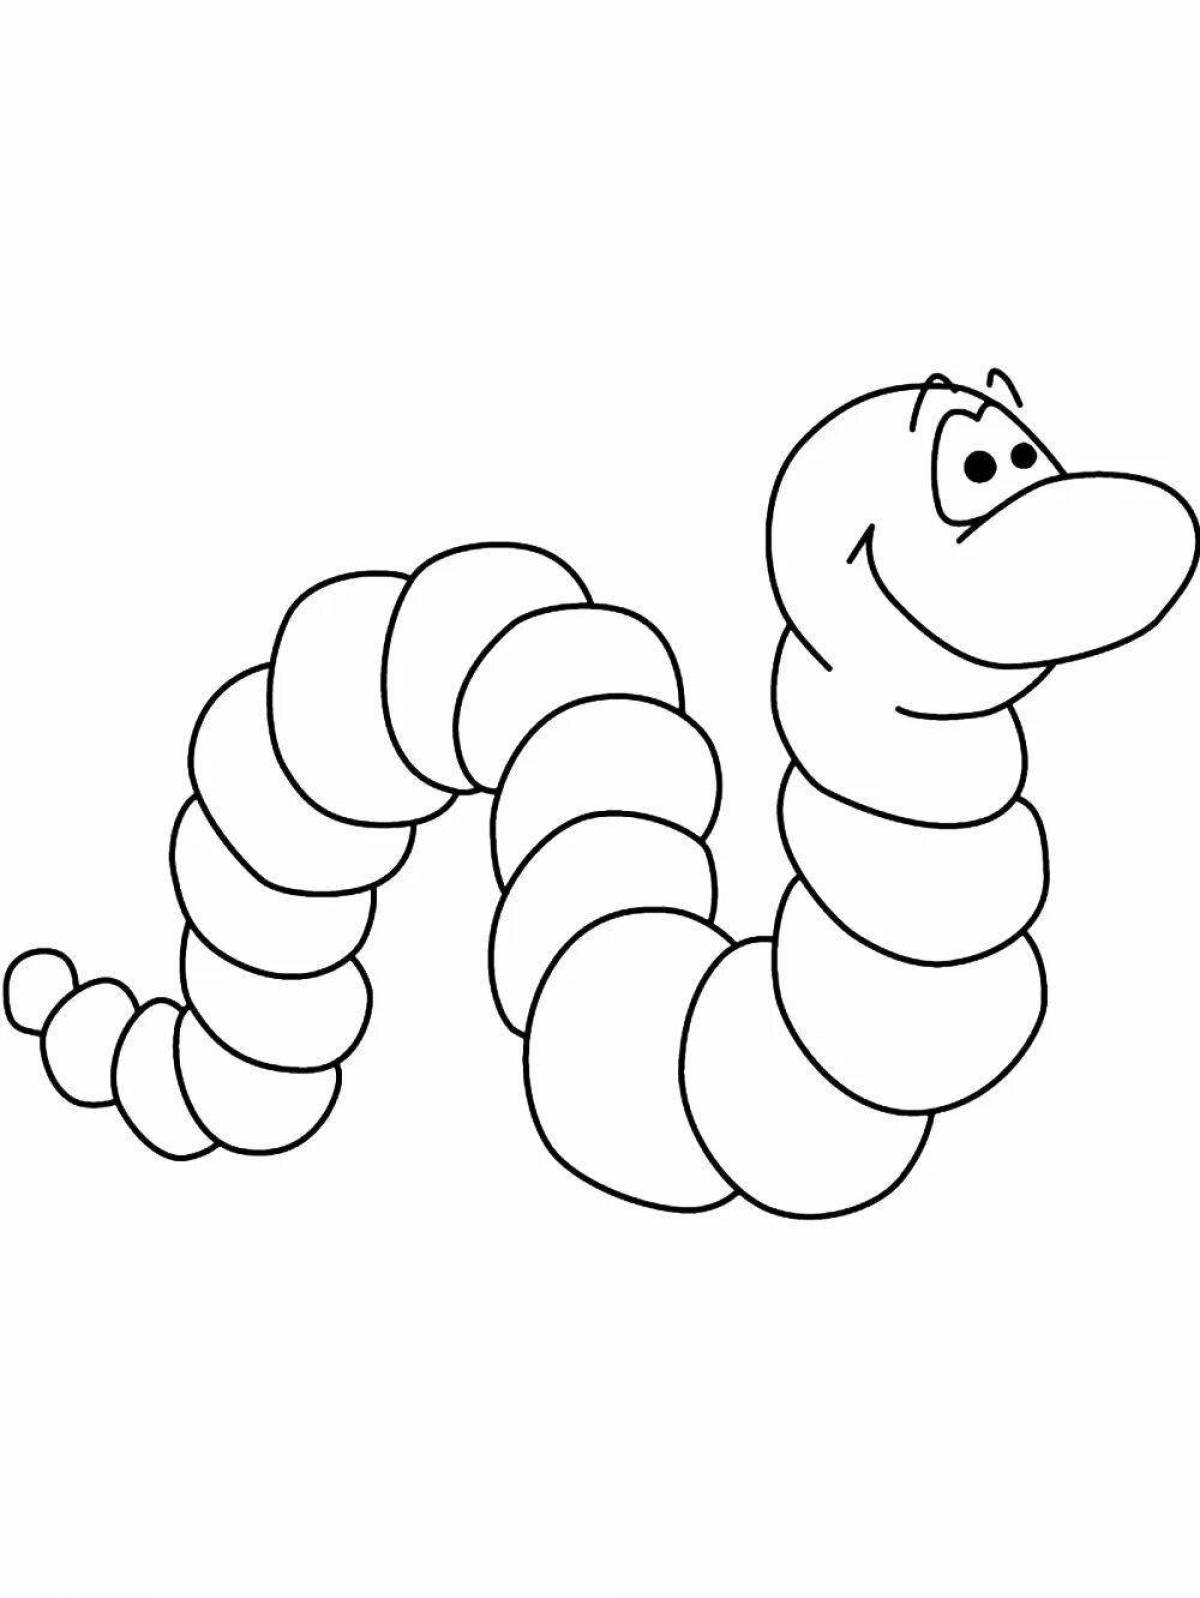 Fun worm coloring for kids